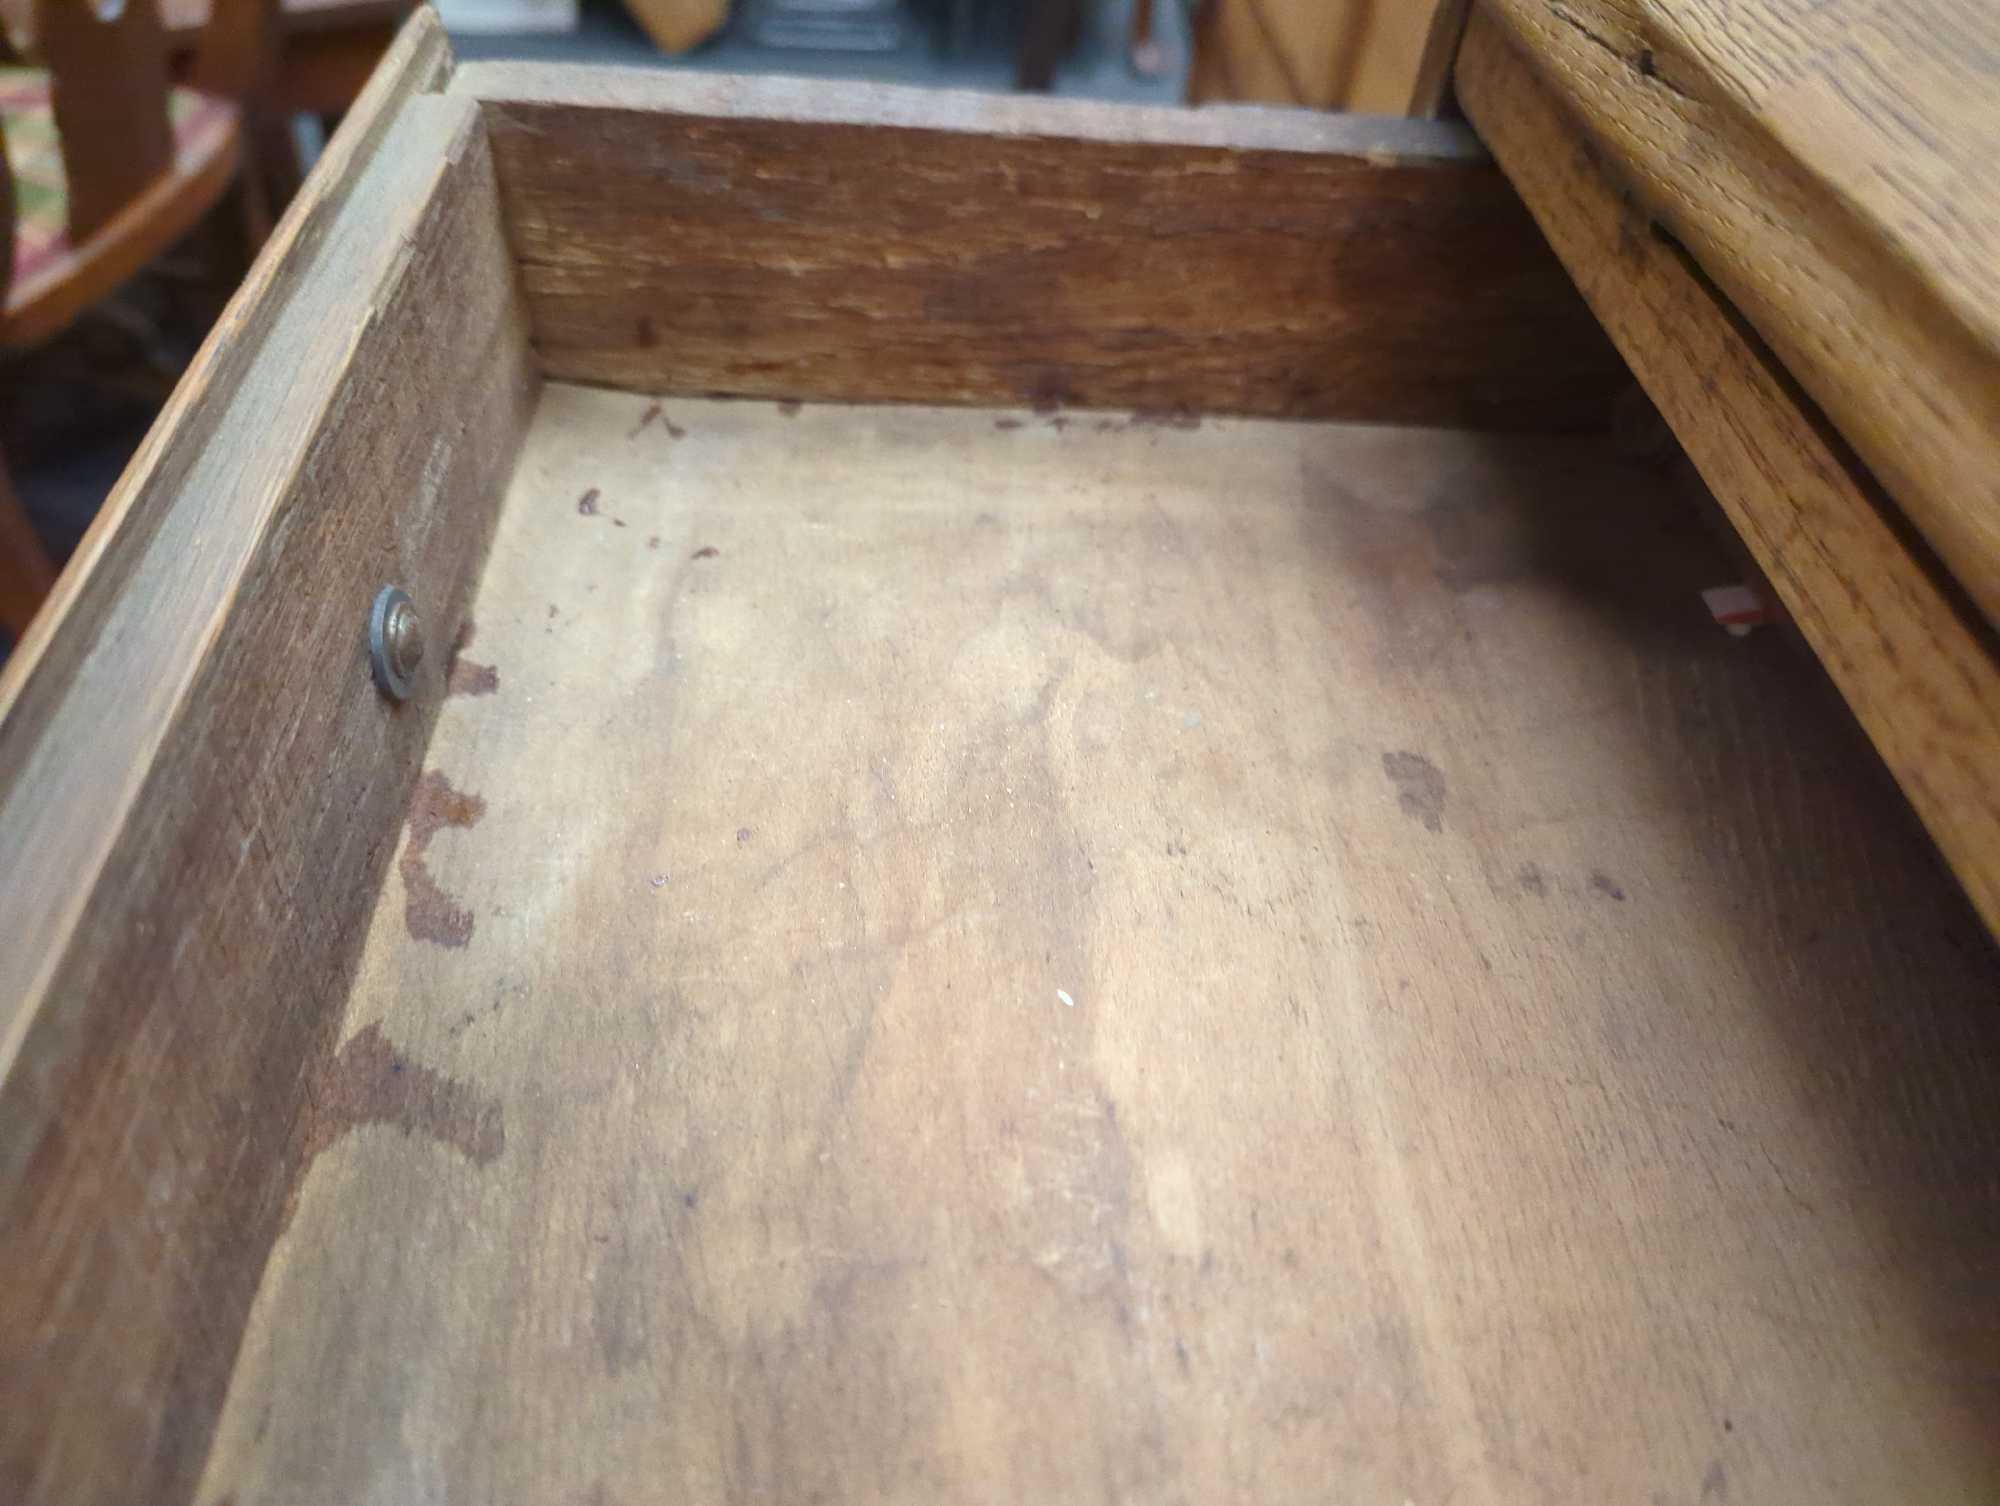 Desk Secretary Antique Drawer Shelf Colonial Book, Show Some Signs Of Aging Has Some Minor Scratches